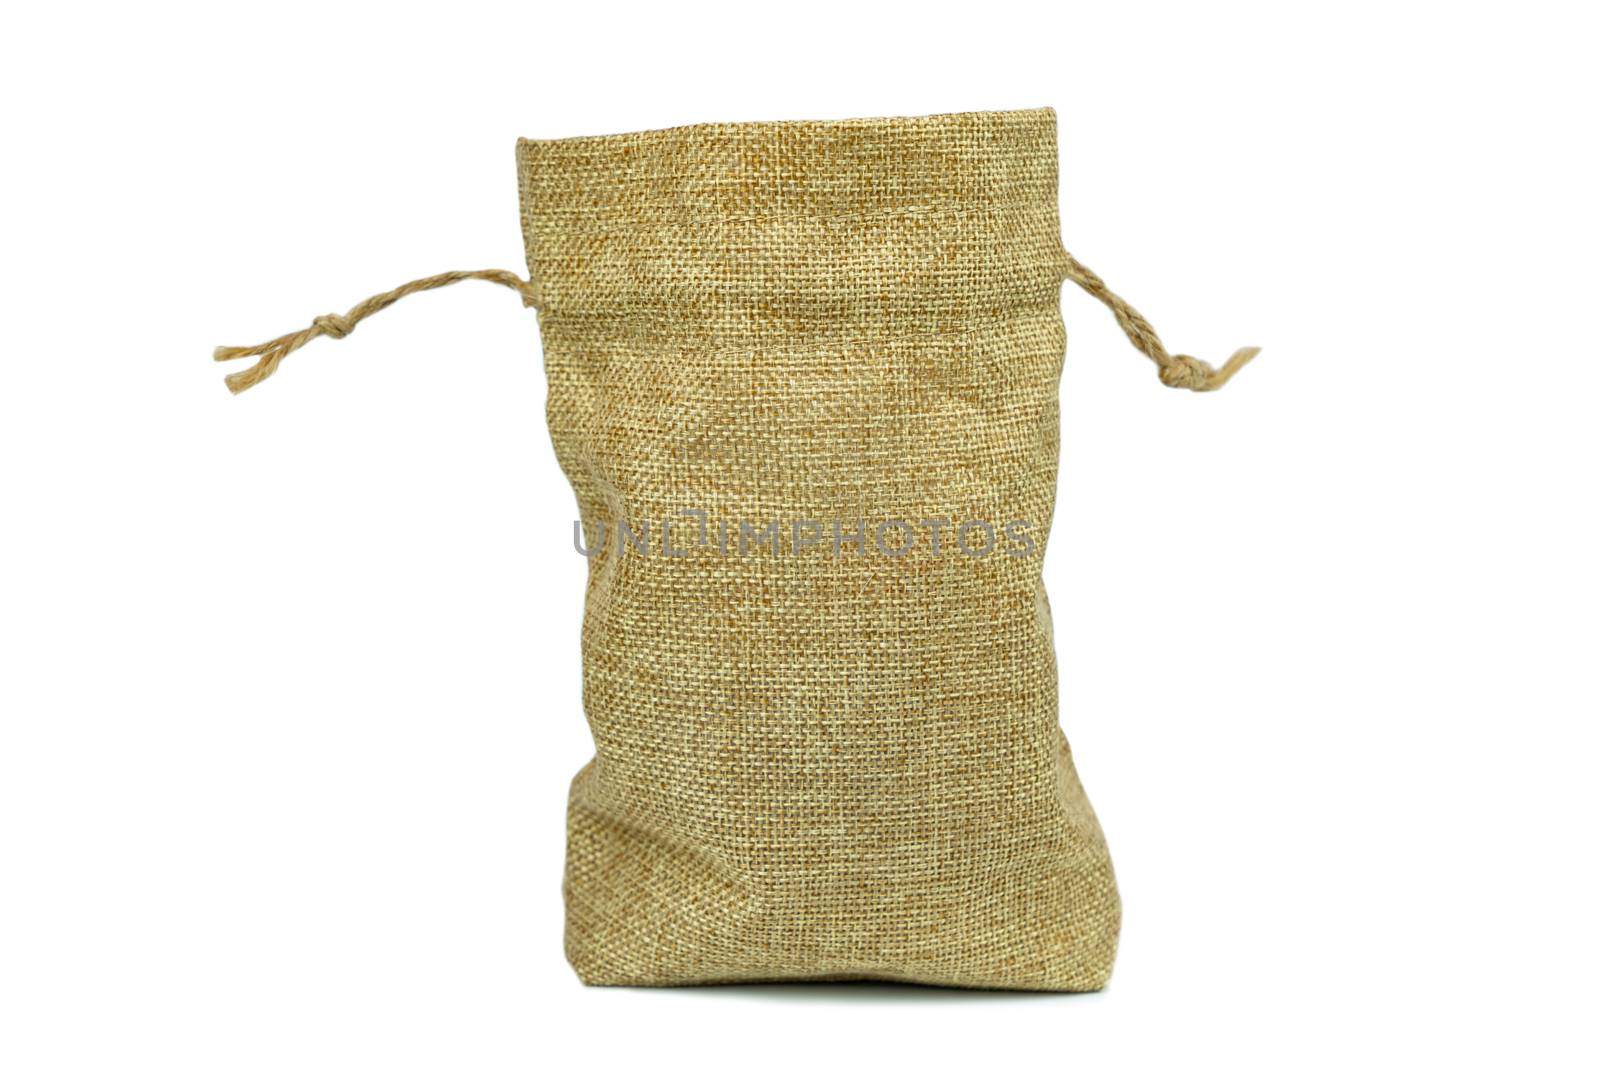 Sack bag on isolated white background by Buttus_casso